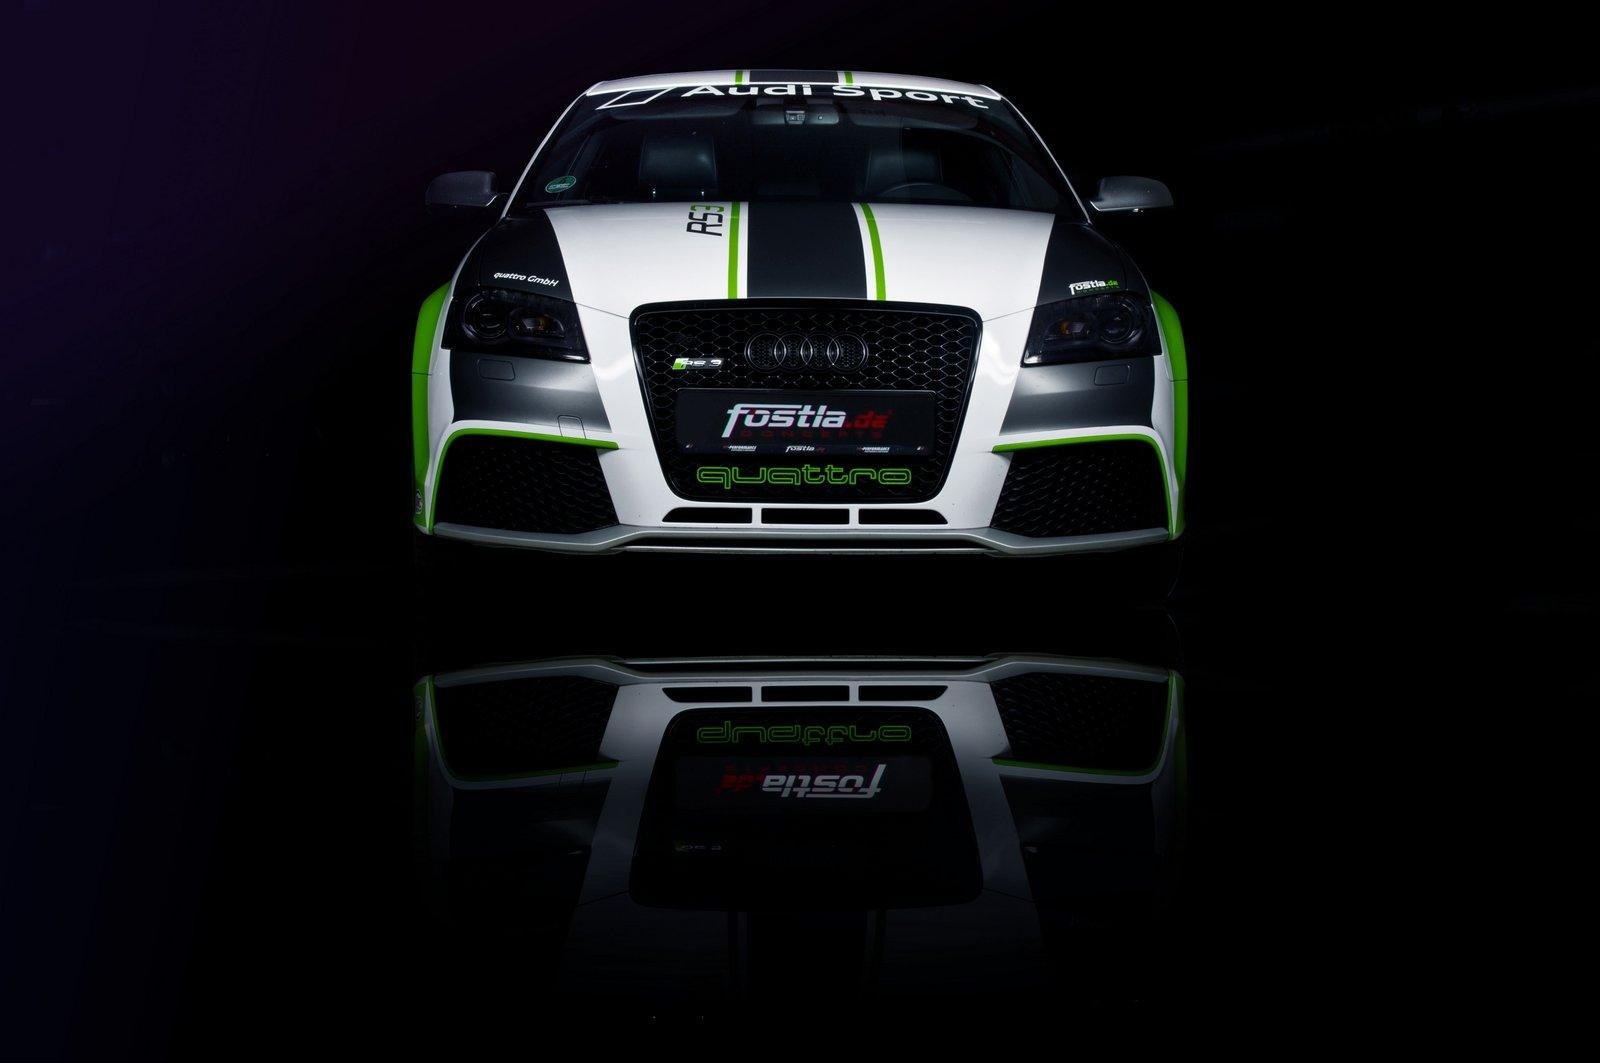 audi, Rs3, Safety, Car, Pp performance, Fosla, Cars, Modified Wallpaper